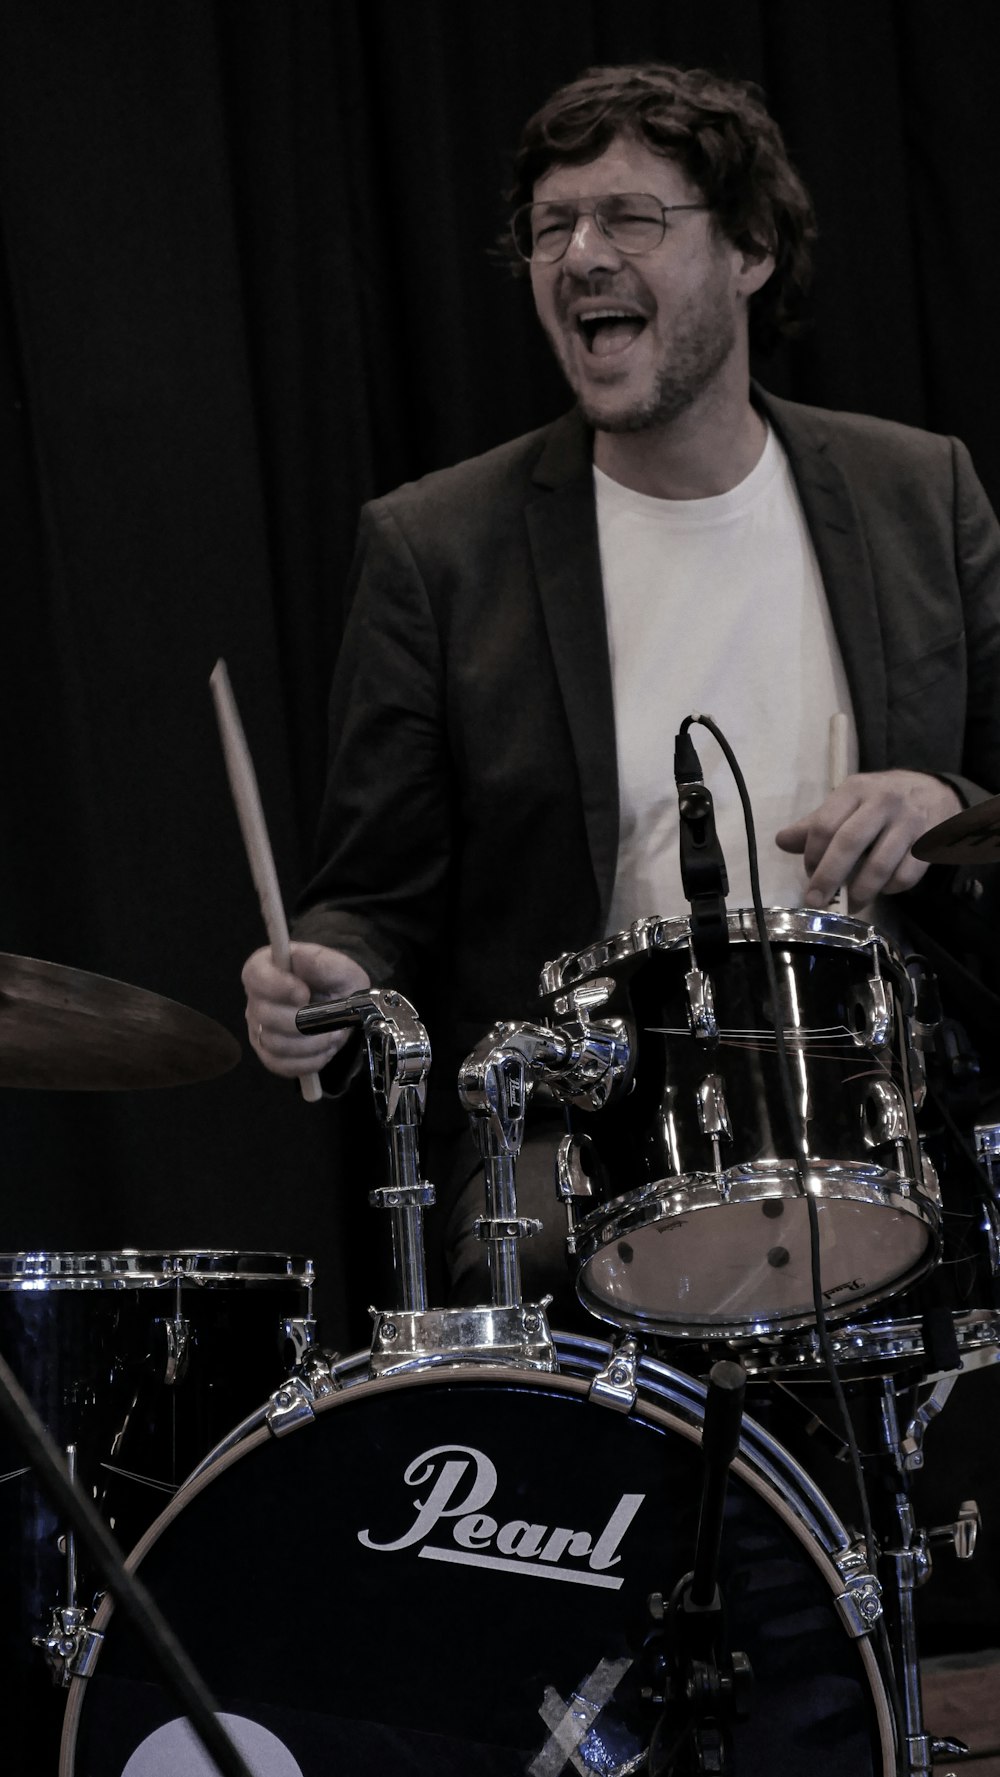 a man in a suit and glasses playing drums